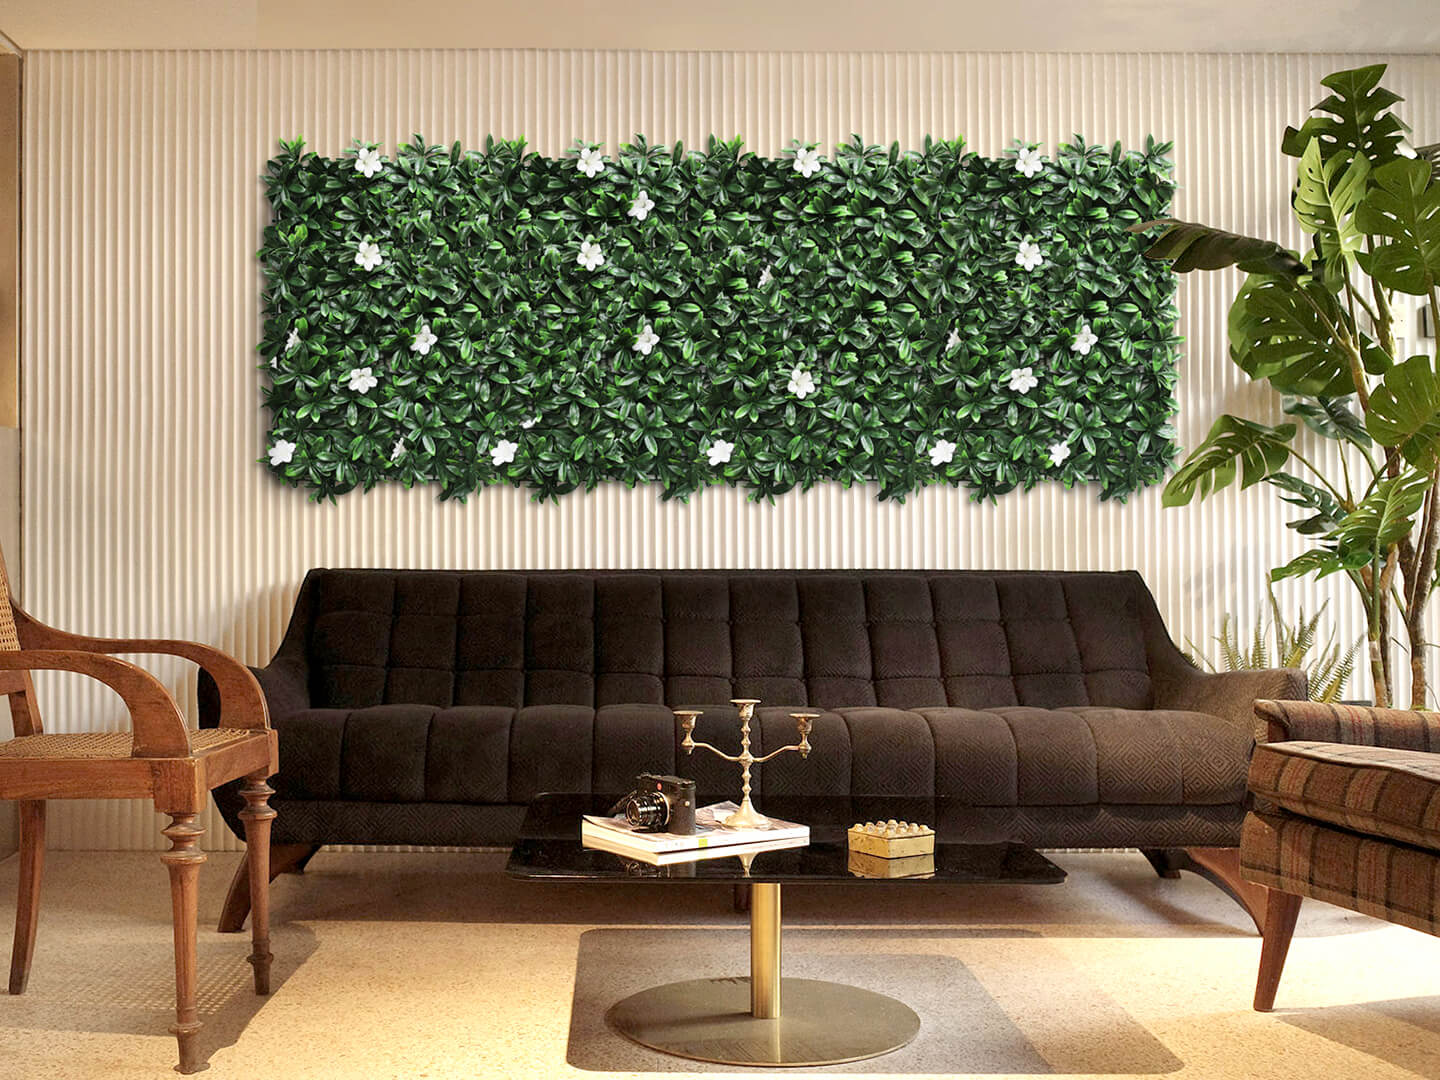 Home decoration with artificial plants